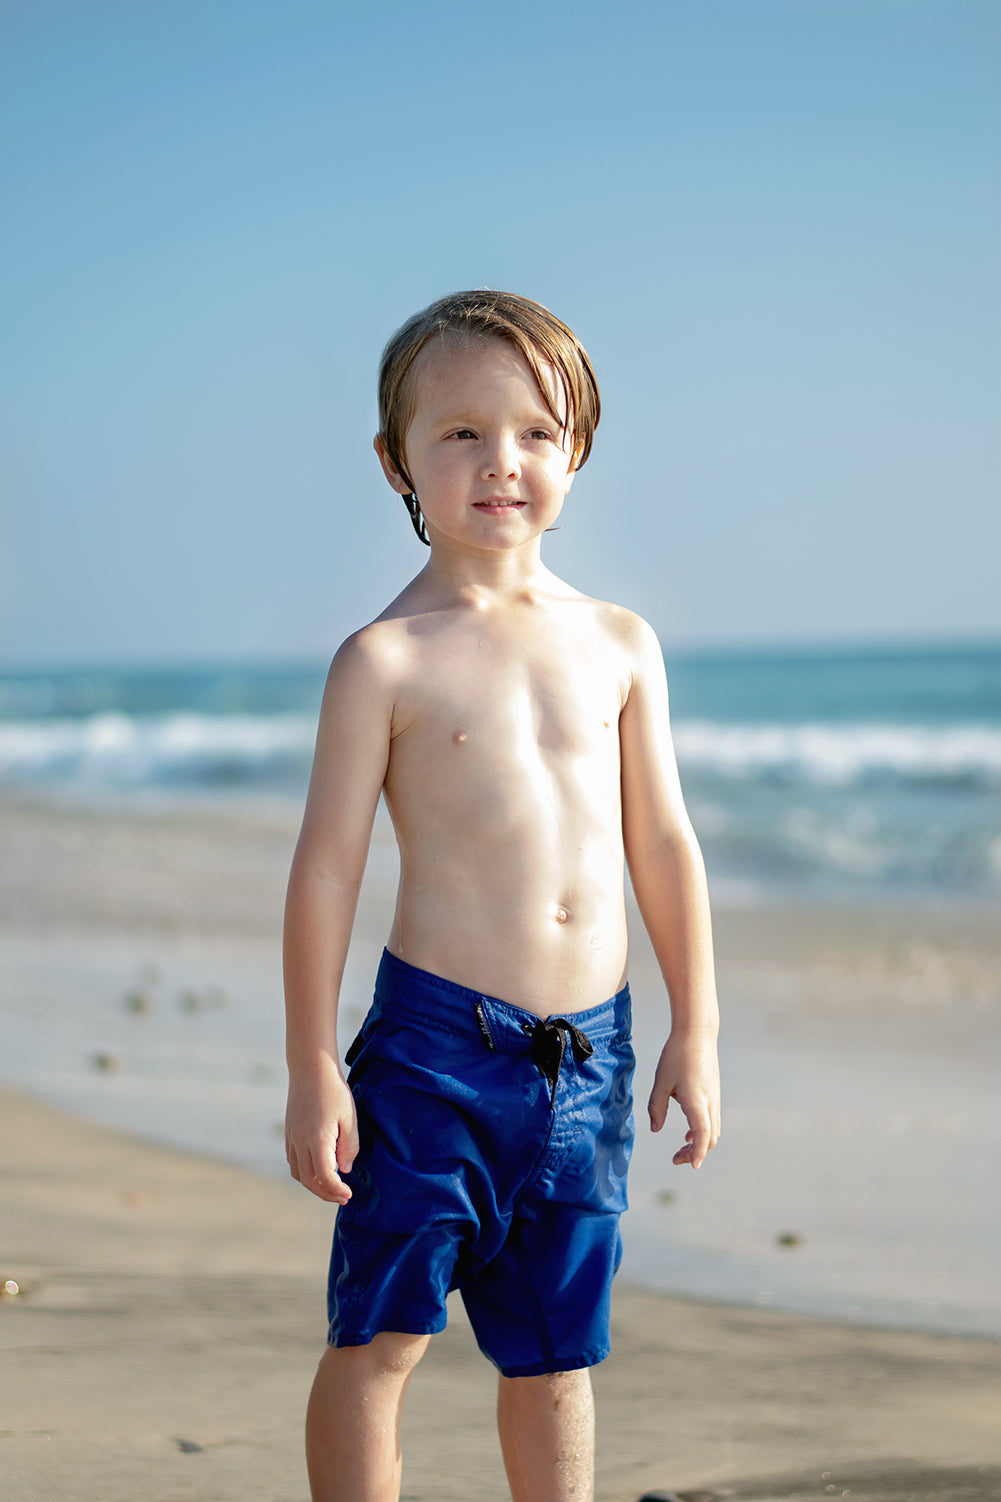 Introducing our cool and versatile 'Blue Shorts' for kids - a must-have addition to their summer wardrobe! These stylish shorts feature a timeless blue hue, perfect for various water activities. Available in sizes for kids aged 6 months to 5 years, the 'Blue Shorts' offer a comfortable fit, allowing young ones to move freely and enjoy the beach or pool to the fullest.